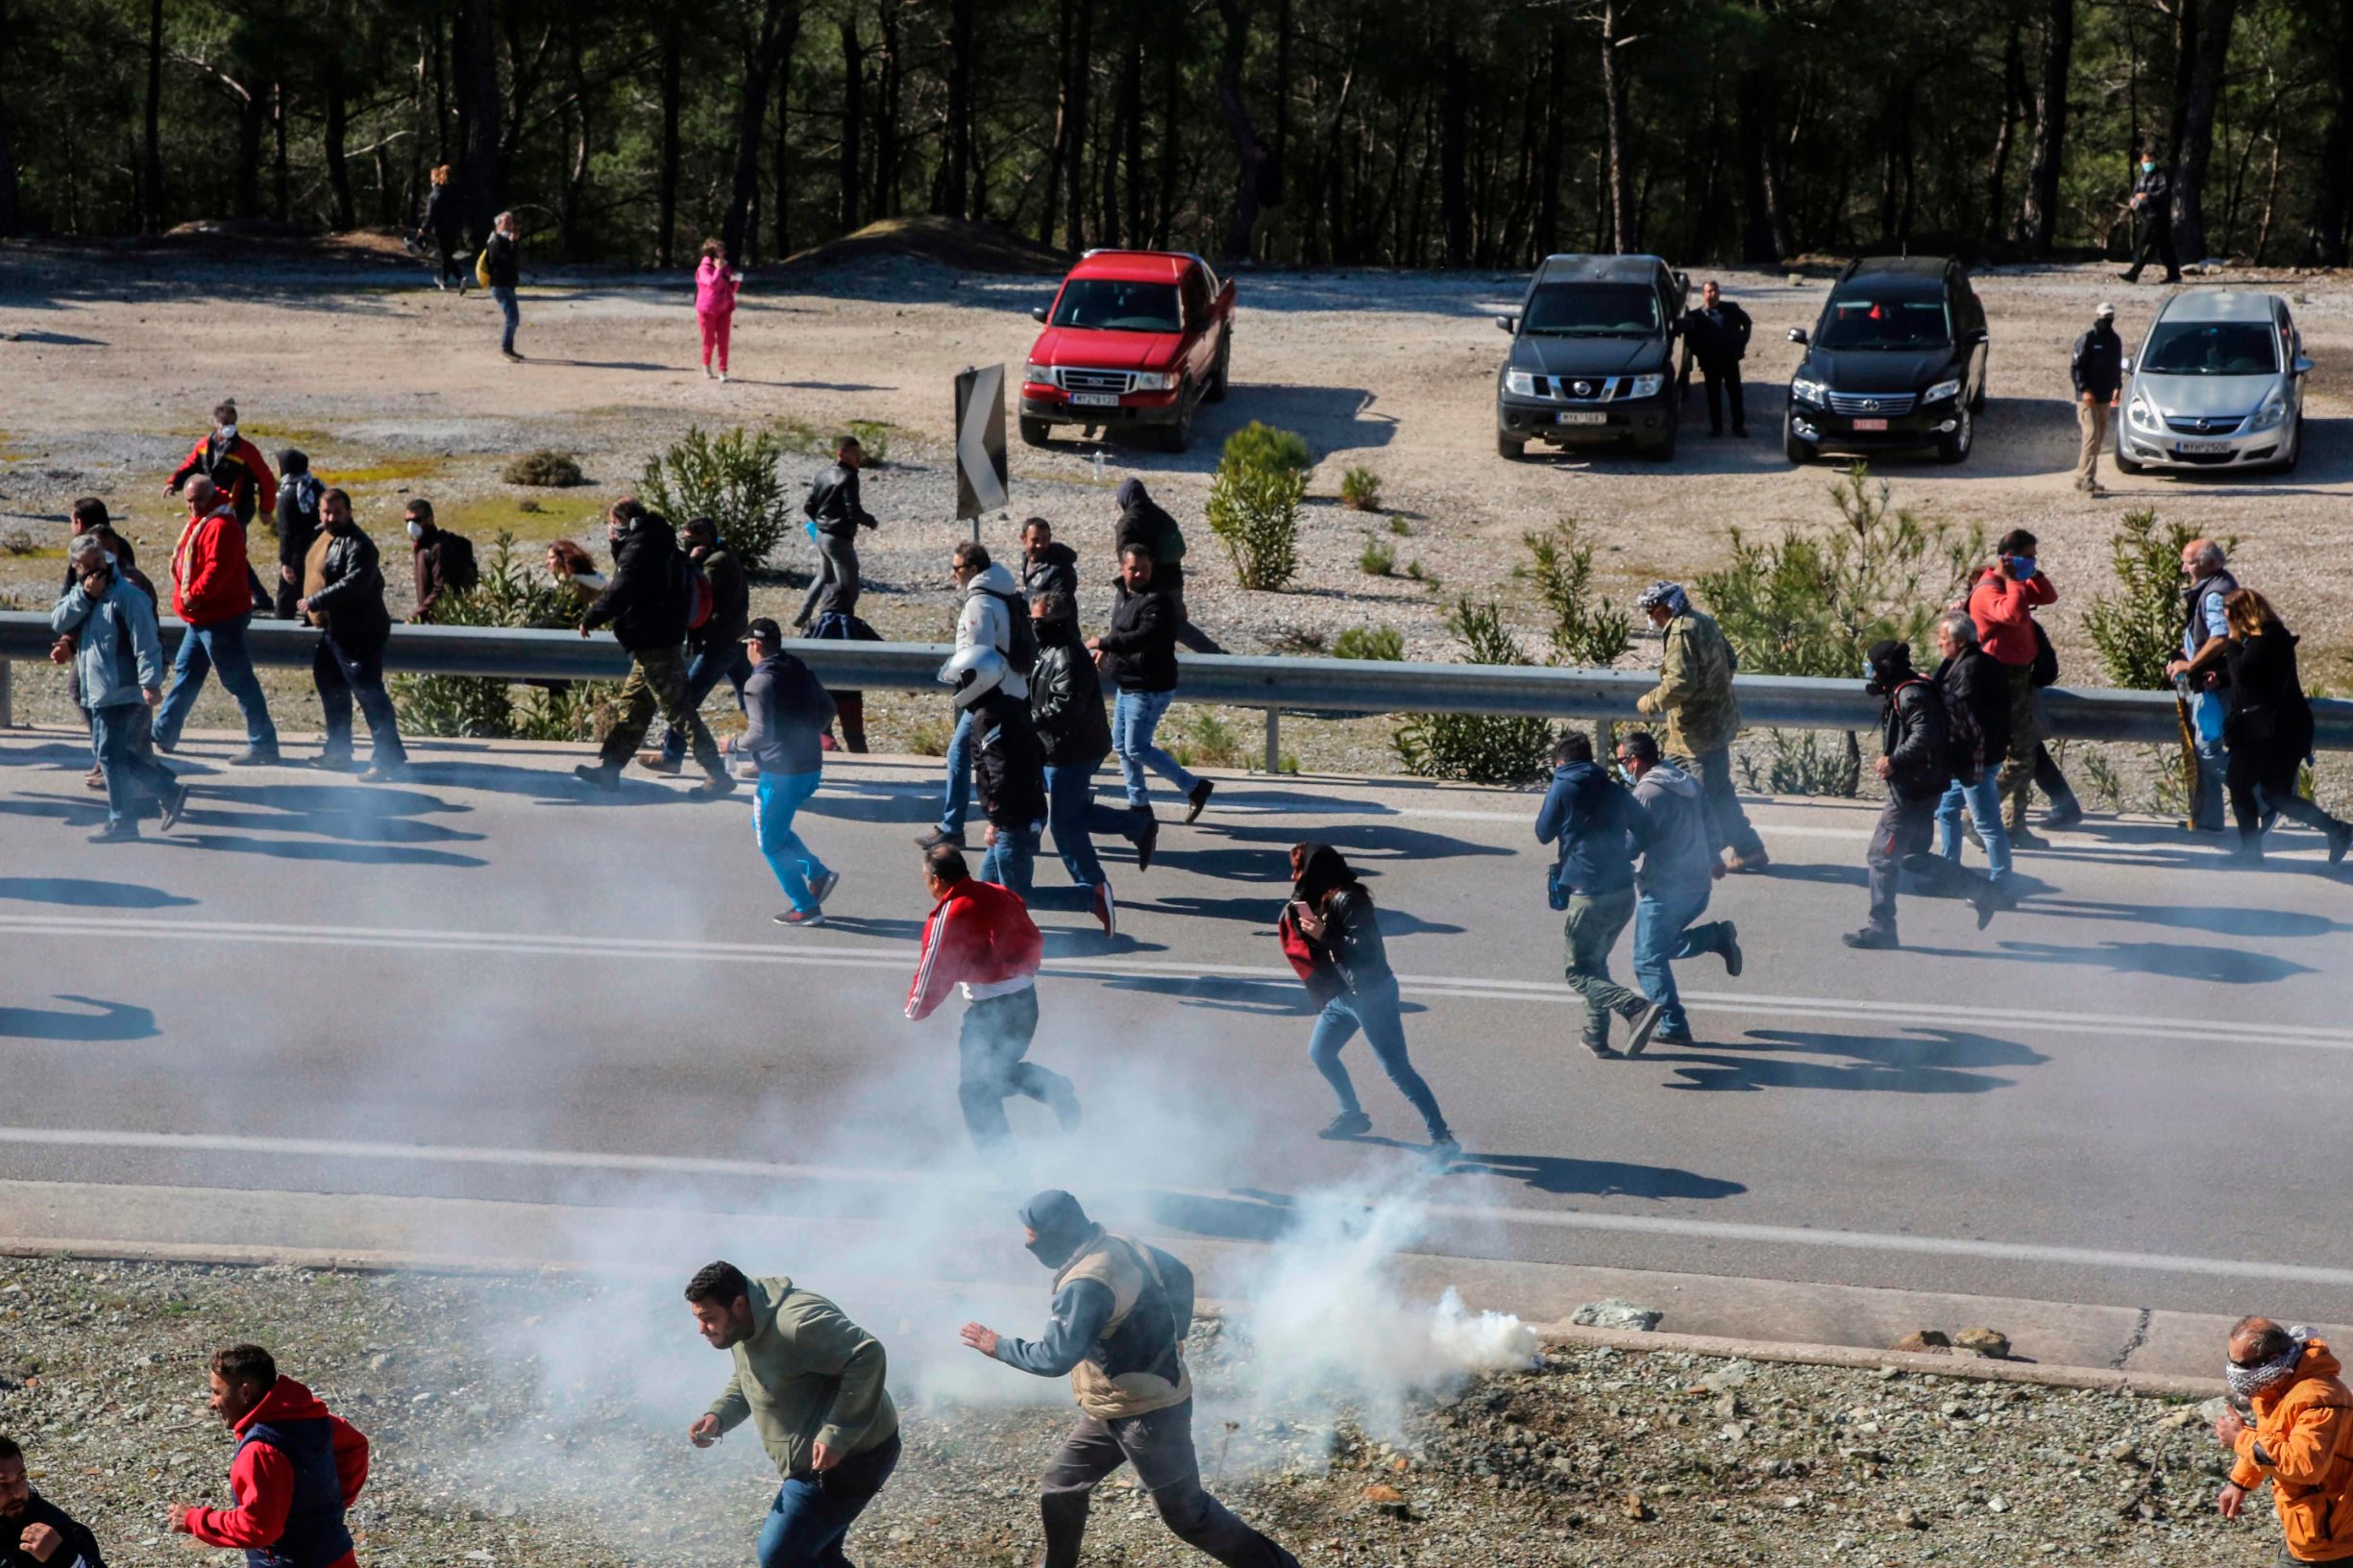 Demonstrators run during a protest against the construction of a new controversial migrant camp near the town of Mantamados on the northeastern Aegean island of Lesbos, on February 26, 2020. - The Greek islands of Lesbos, Chios and Samos staged a general strike on February 26, as protests against the construction of new migrant camps intensified. For a second day, protesters on Lesbos faced off against riot police near the town of Mantamados, close to the site of a planned camp for up to 7,000 people. Small groups of protesters threw stones and firebombs at the police, who responded with tear gas and flash grenades. (Photo by Manolis LAGOUTARIS / AFP)